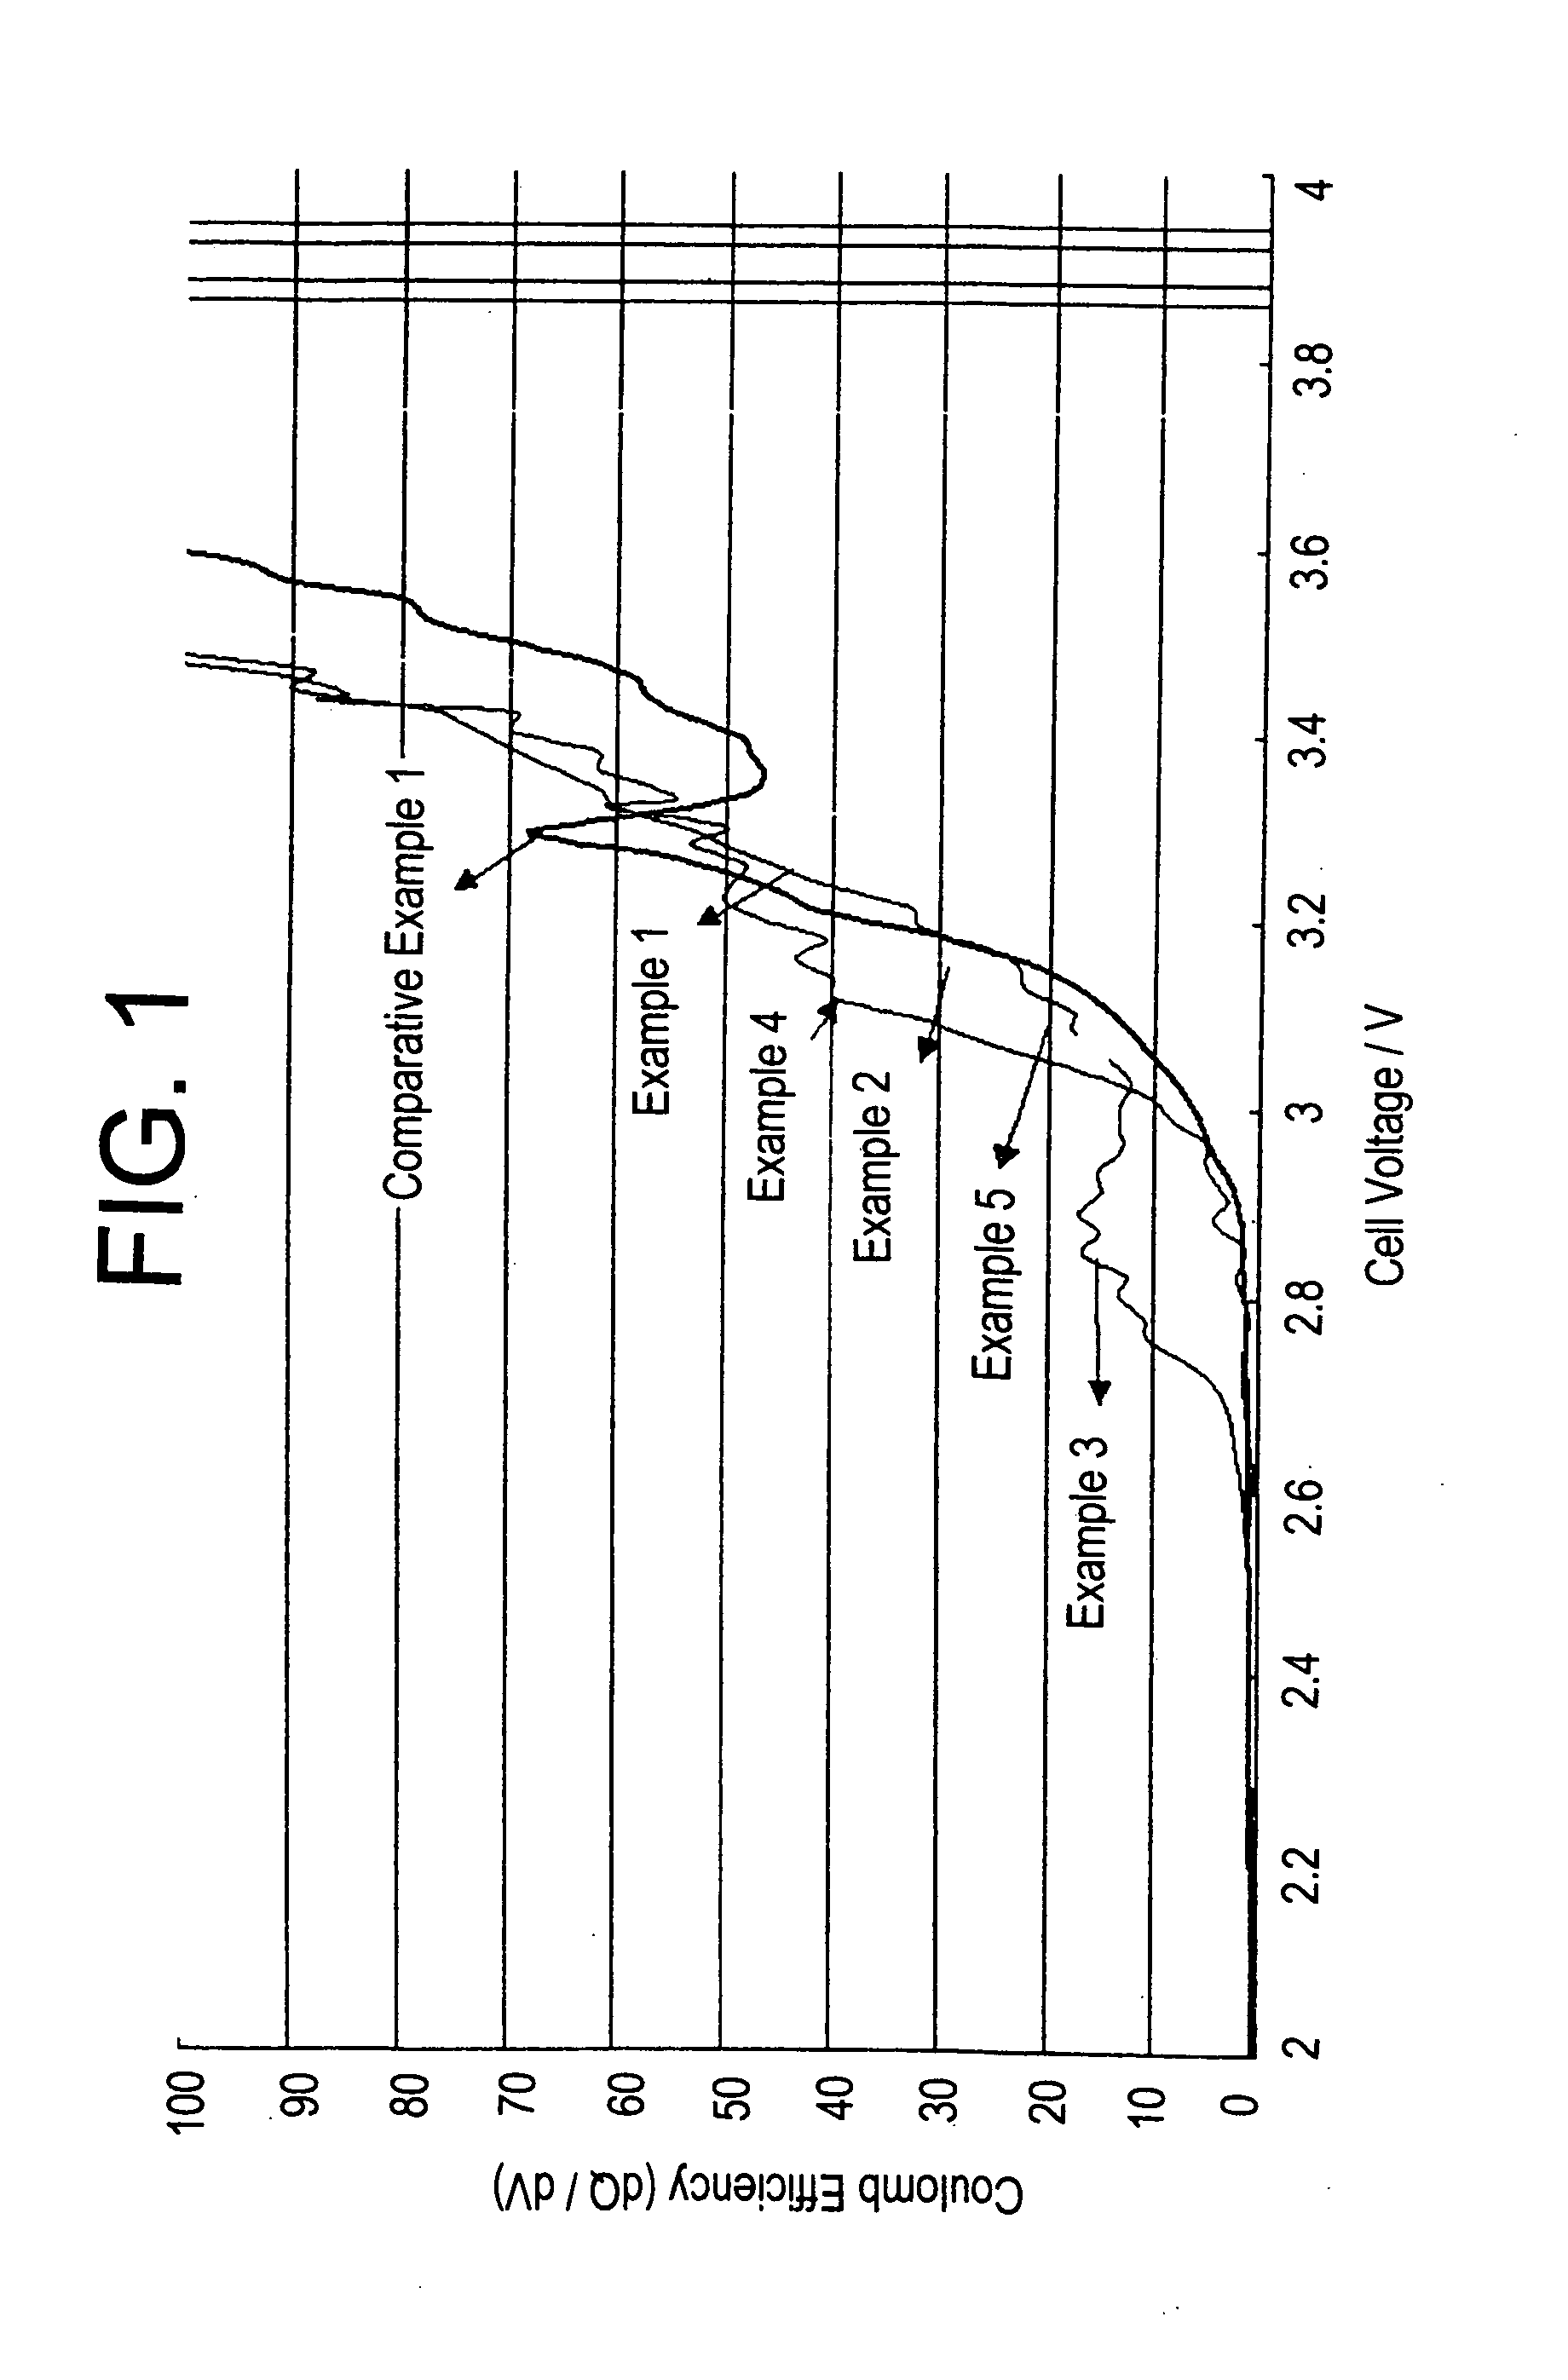 Electrolyte and rechargeable lithium battery